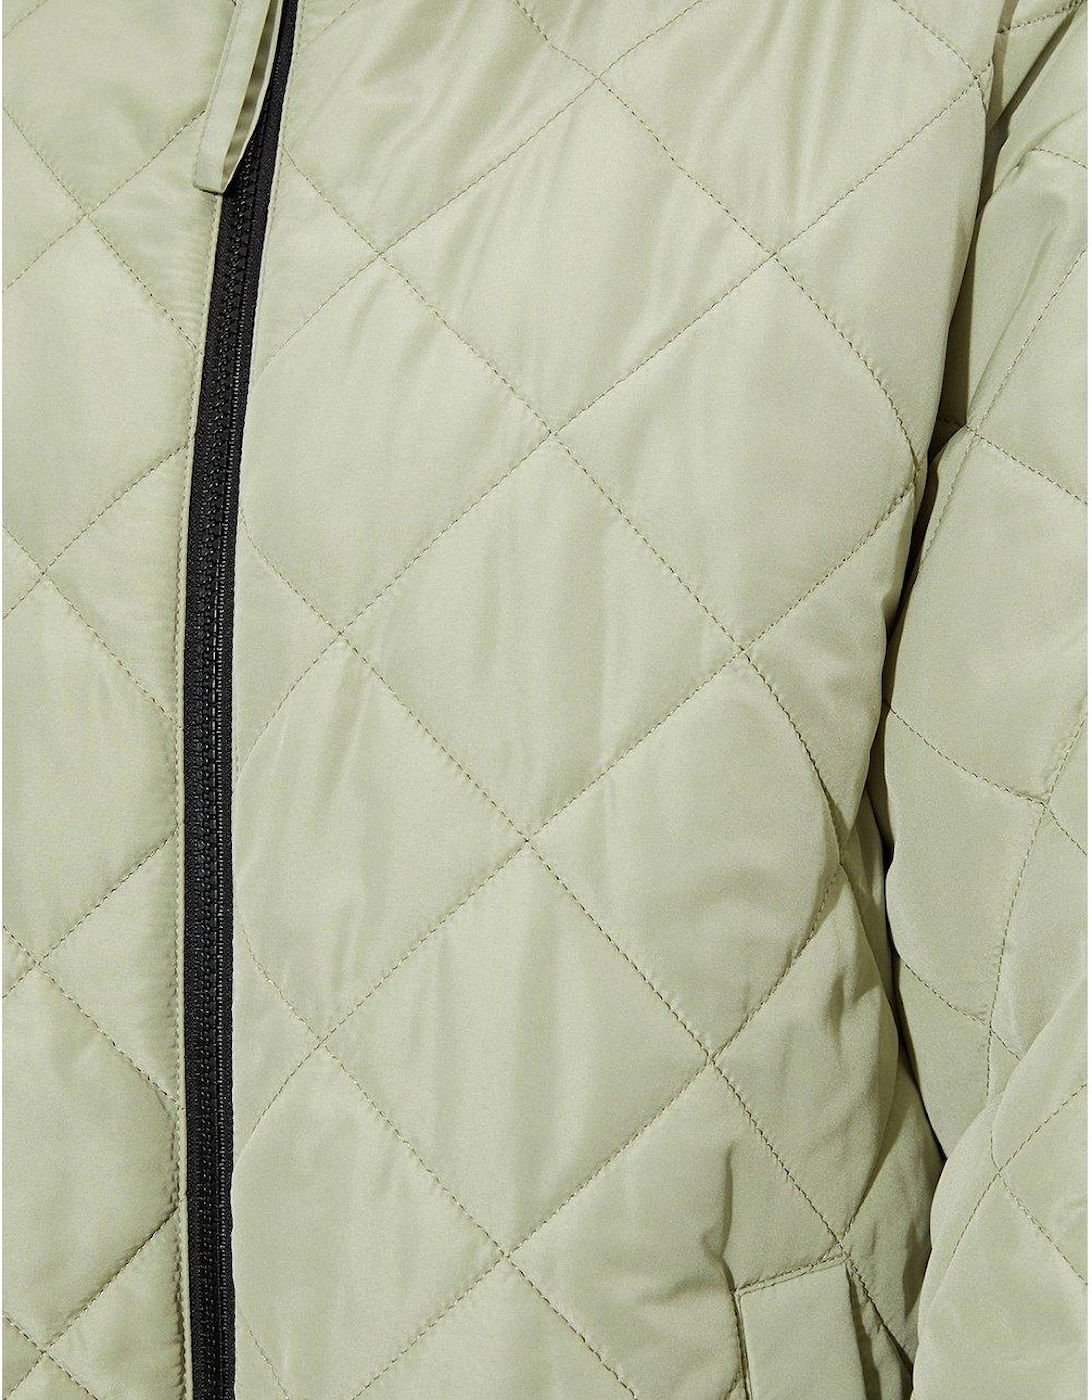 Womens/Ladies Diamond Quilted Hooded Oversized Coat